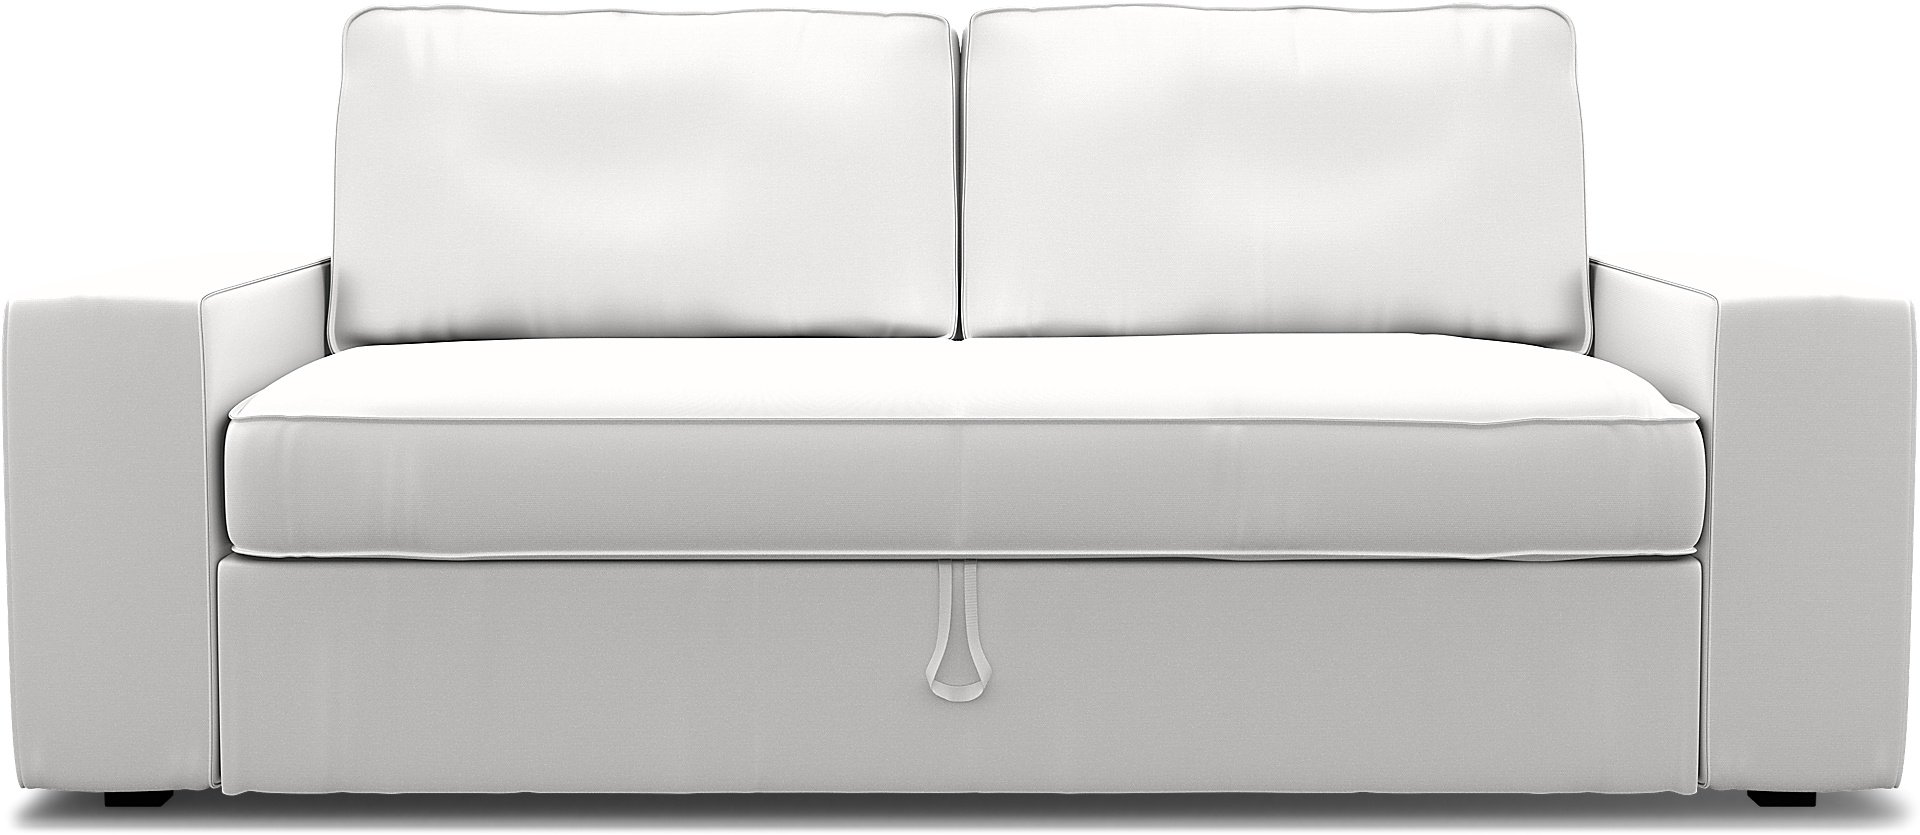 IKEA - Vilasund 3 seater sofa bed cover, Absolute White, Cotton - Bemz